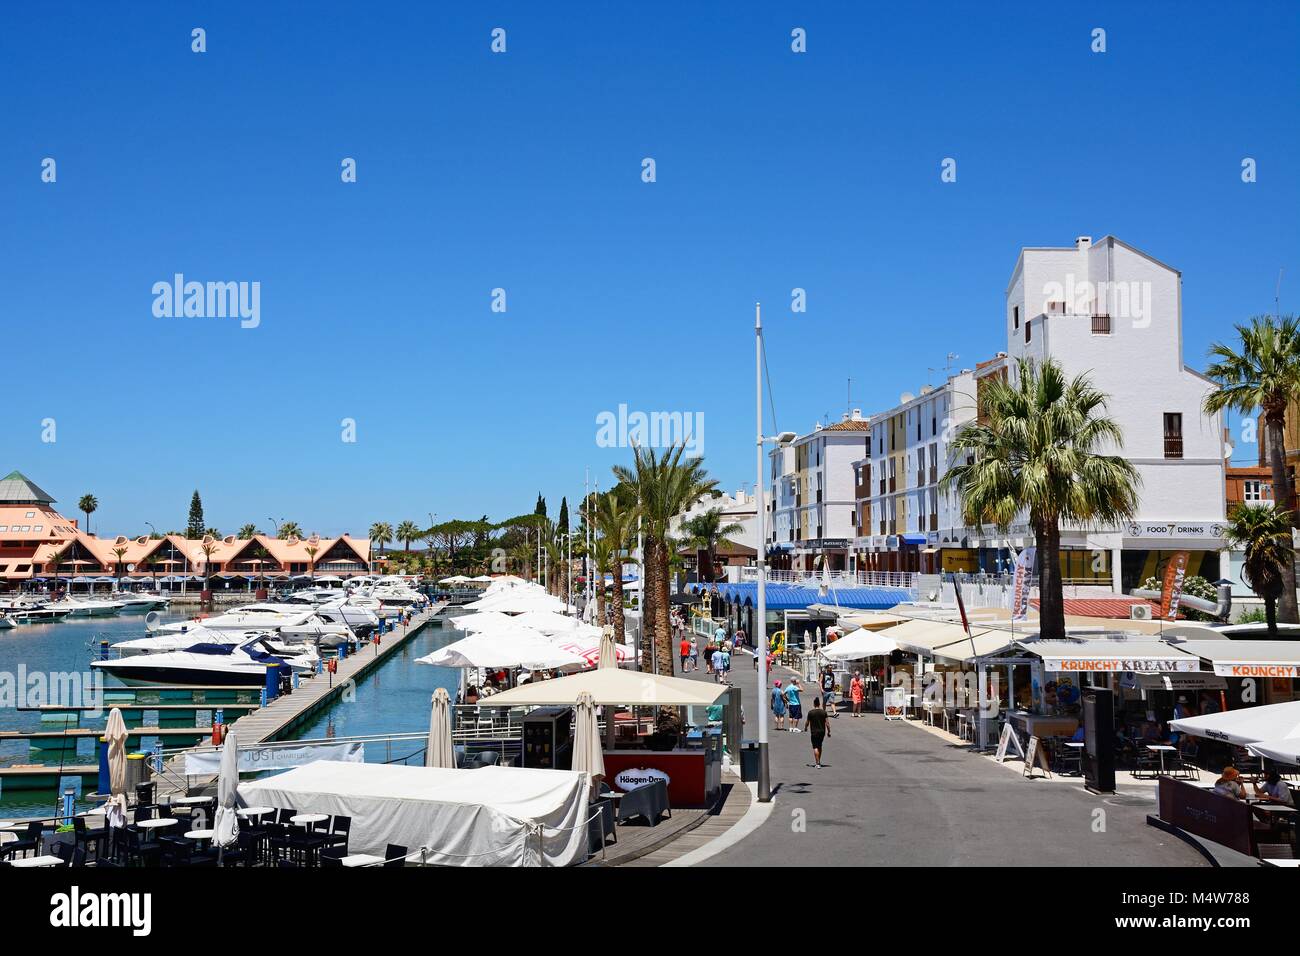 Boats moored in the marina with tourists walking along the restaurant lined promenade, Vilamoura, Algarve, Portugal, Europe. Stock Photo